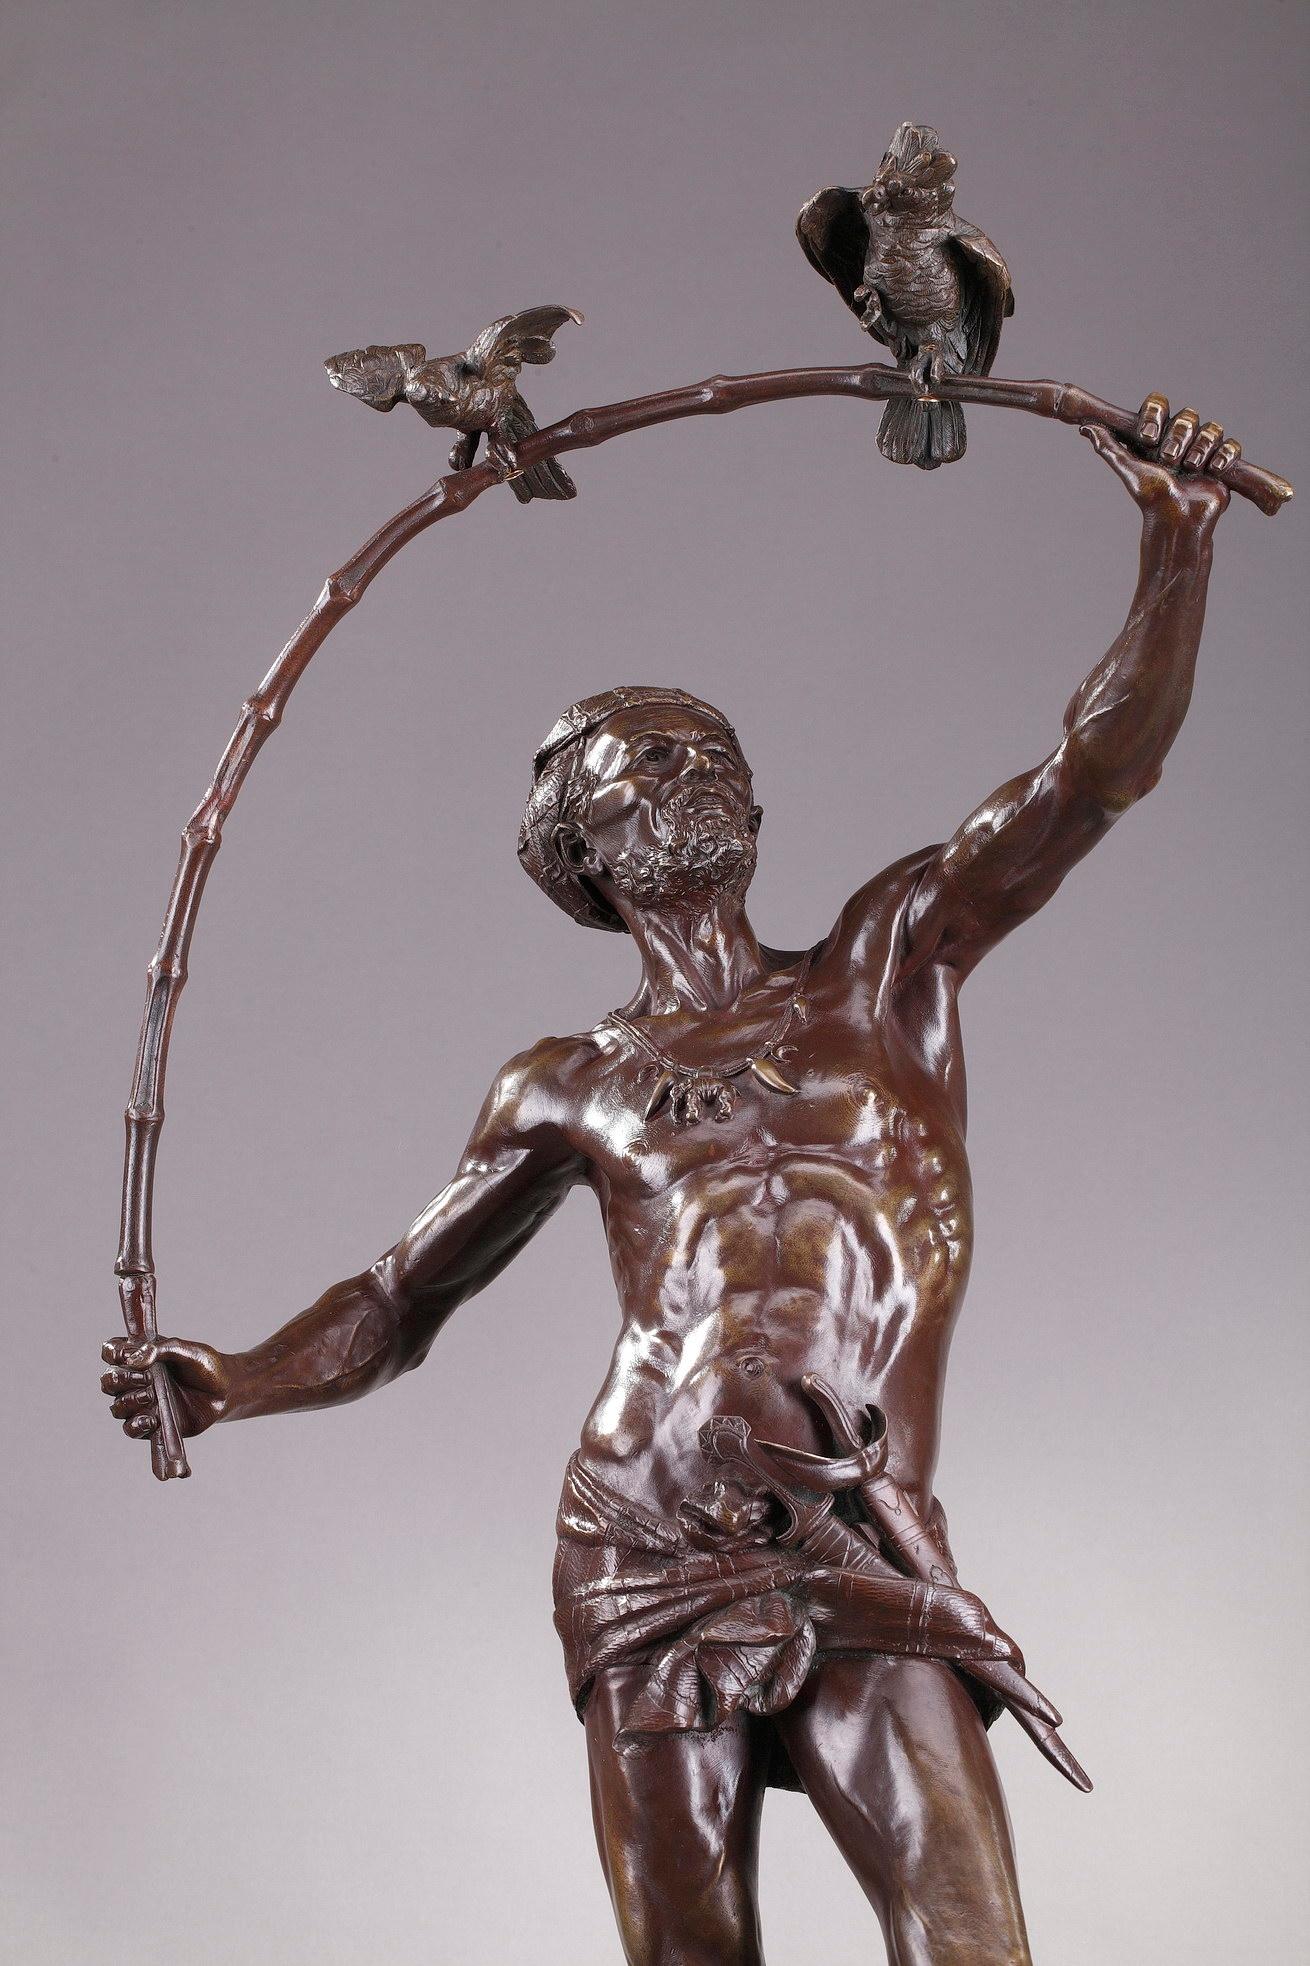 Large bronze statue featuring a Hindu bird-catcher by the Belgian sculptor and medallist Auguste de Wever. He wears a ribbon and a drapery supporting a small sword. His necklace is adorned with an elephant-shaped medallion. Our bird-catcher